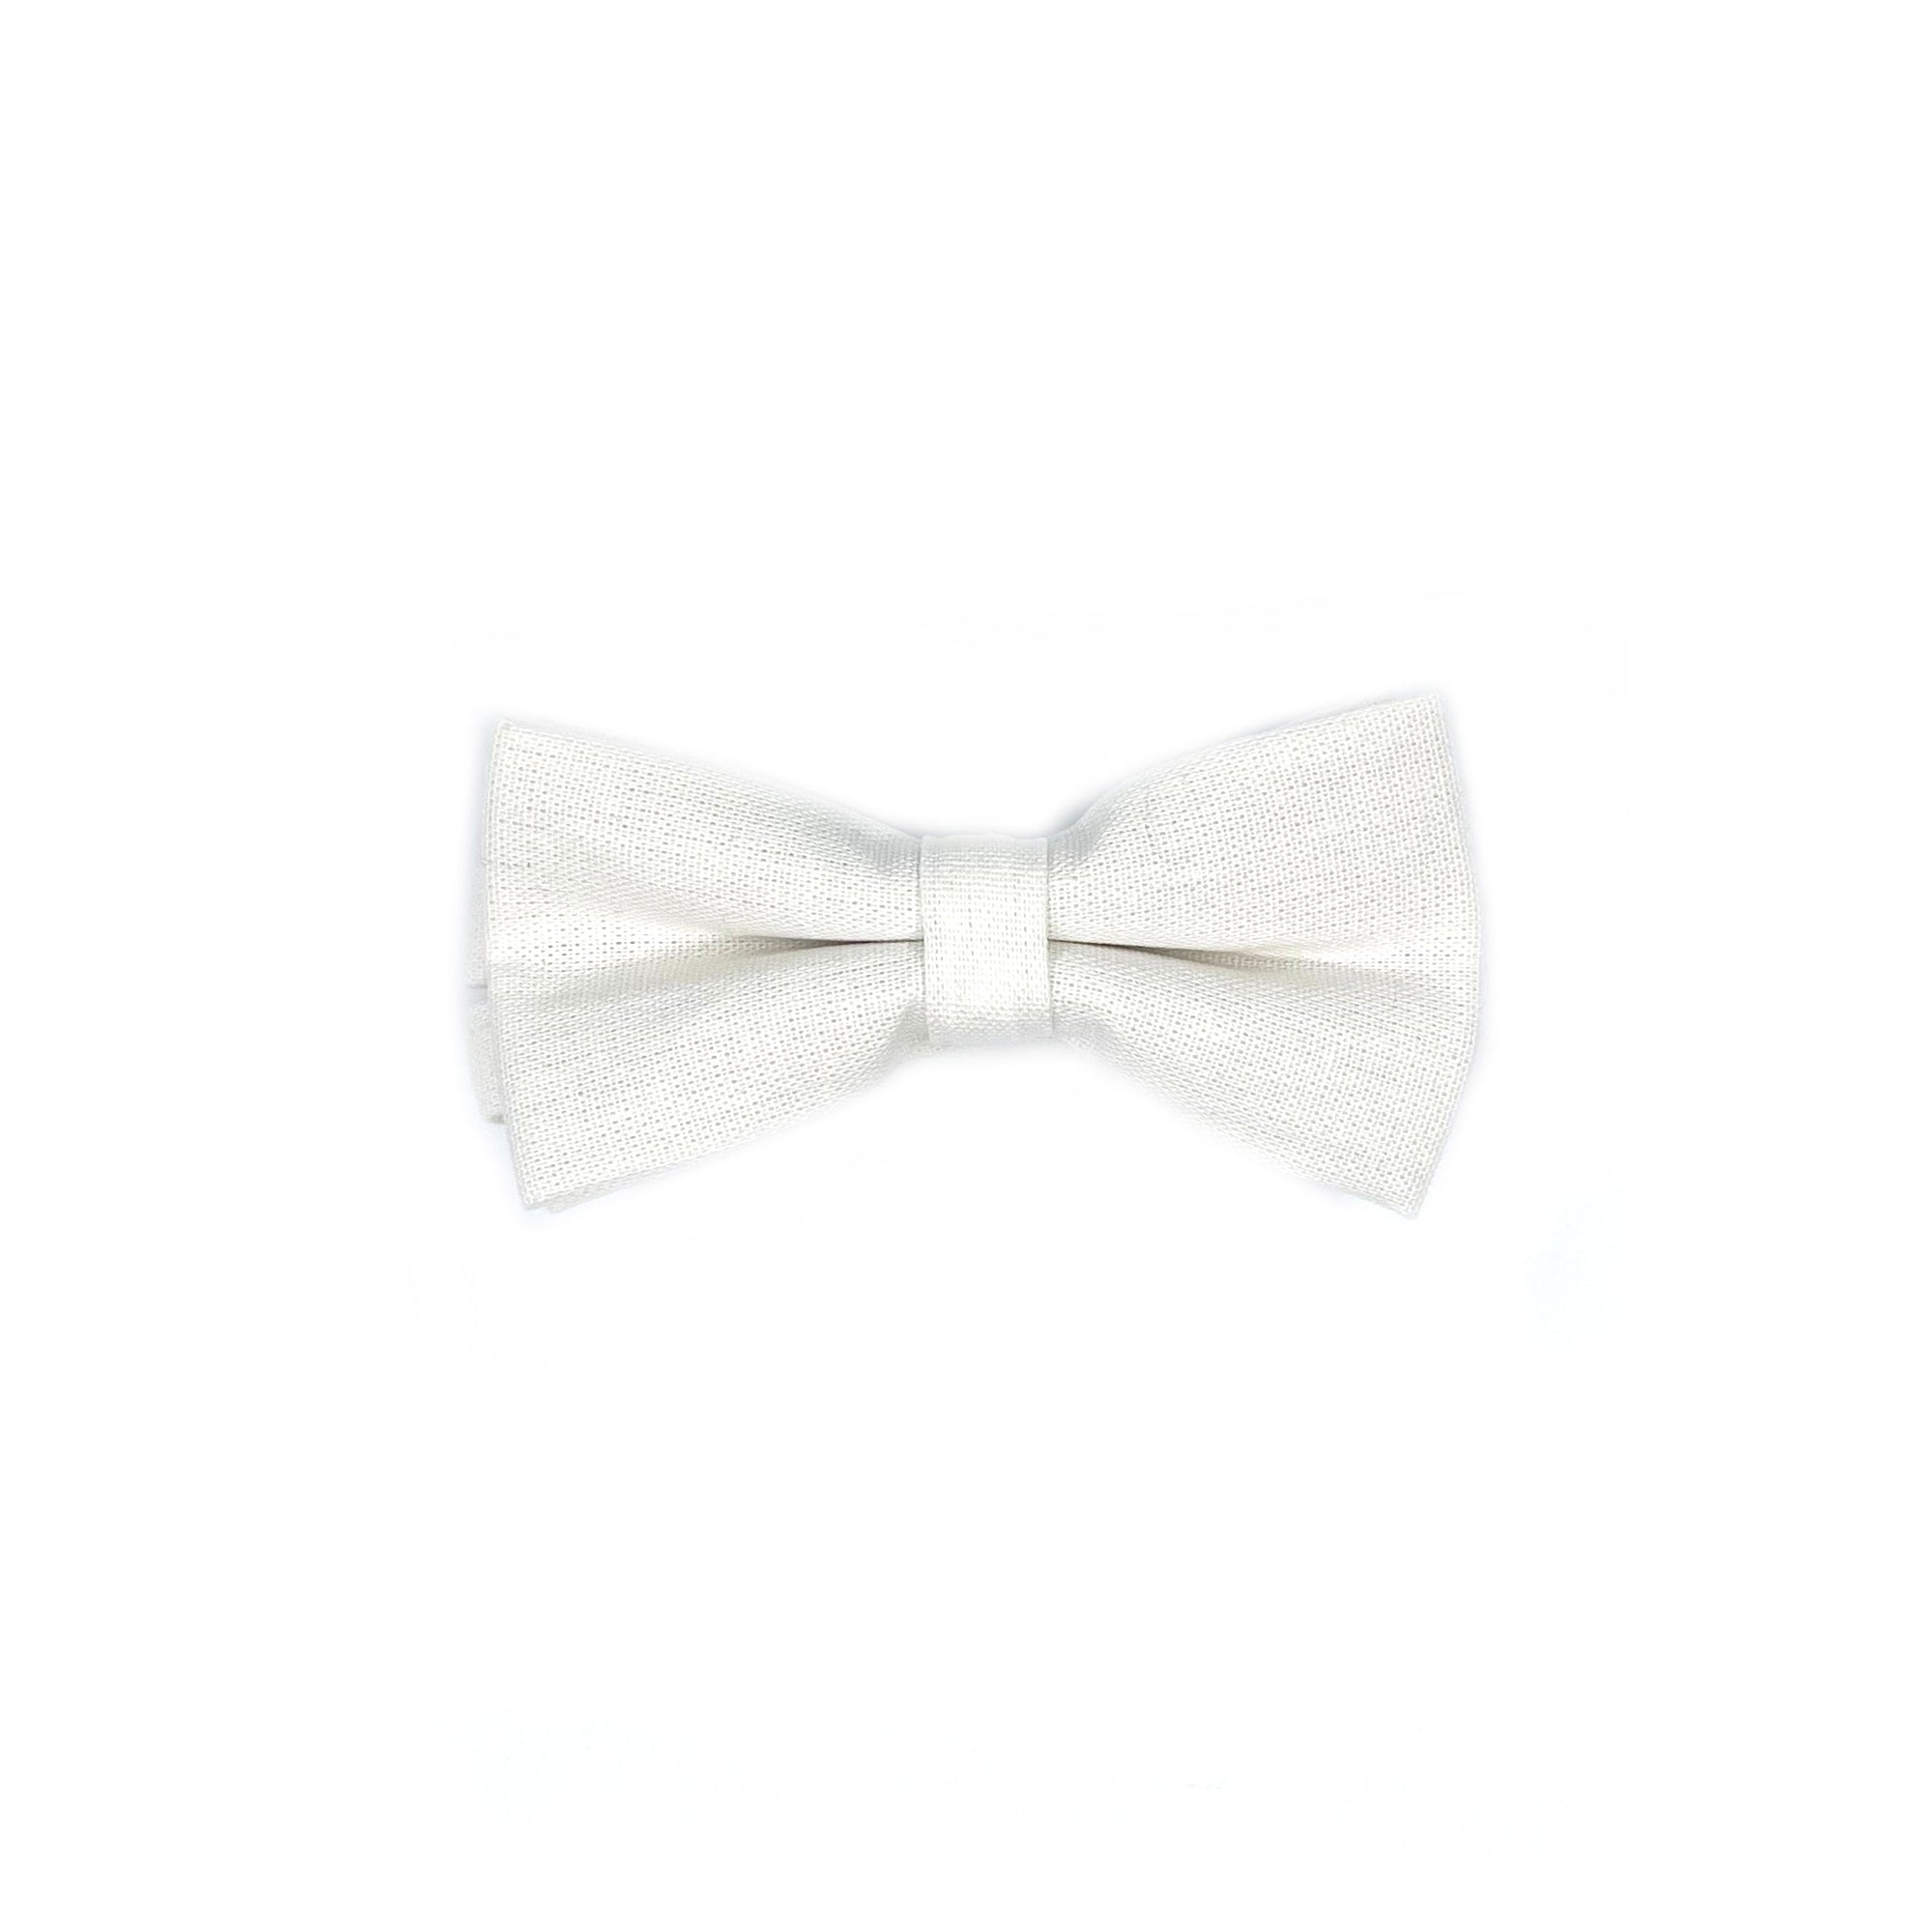 Kids Off White Bow Tie - NATE by Mytieshop-Kids Off White Bow Tie (Pretied) for KidsStrap is Adjustable - 32CM Long (10-18 Inches)Pre-Tied bowtieBow Tie 12CM * 6CMMade from Cotton Color: White-Mytieshop